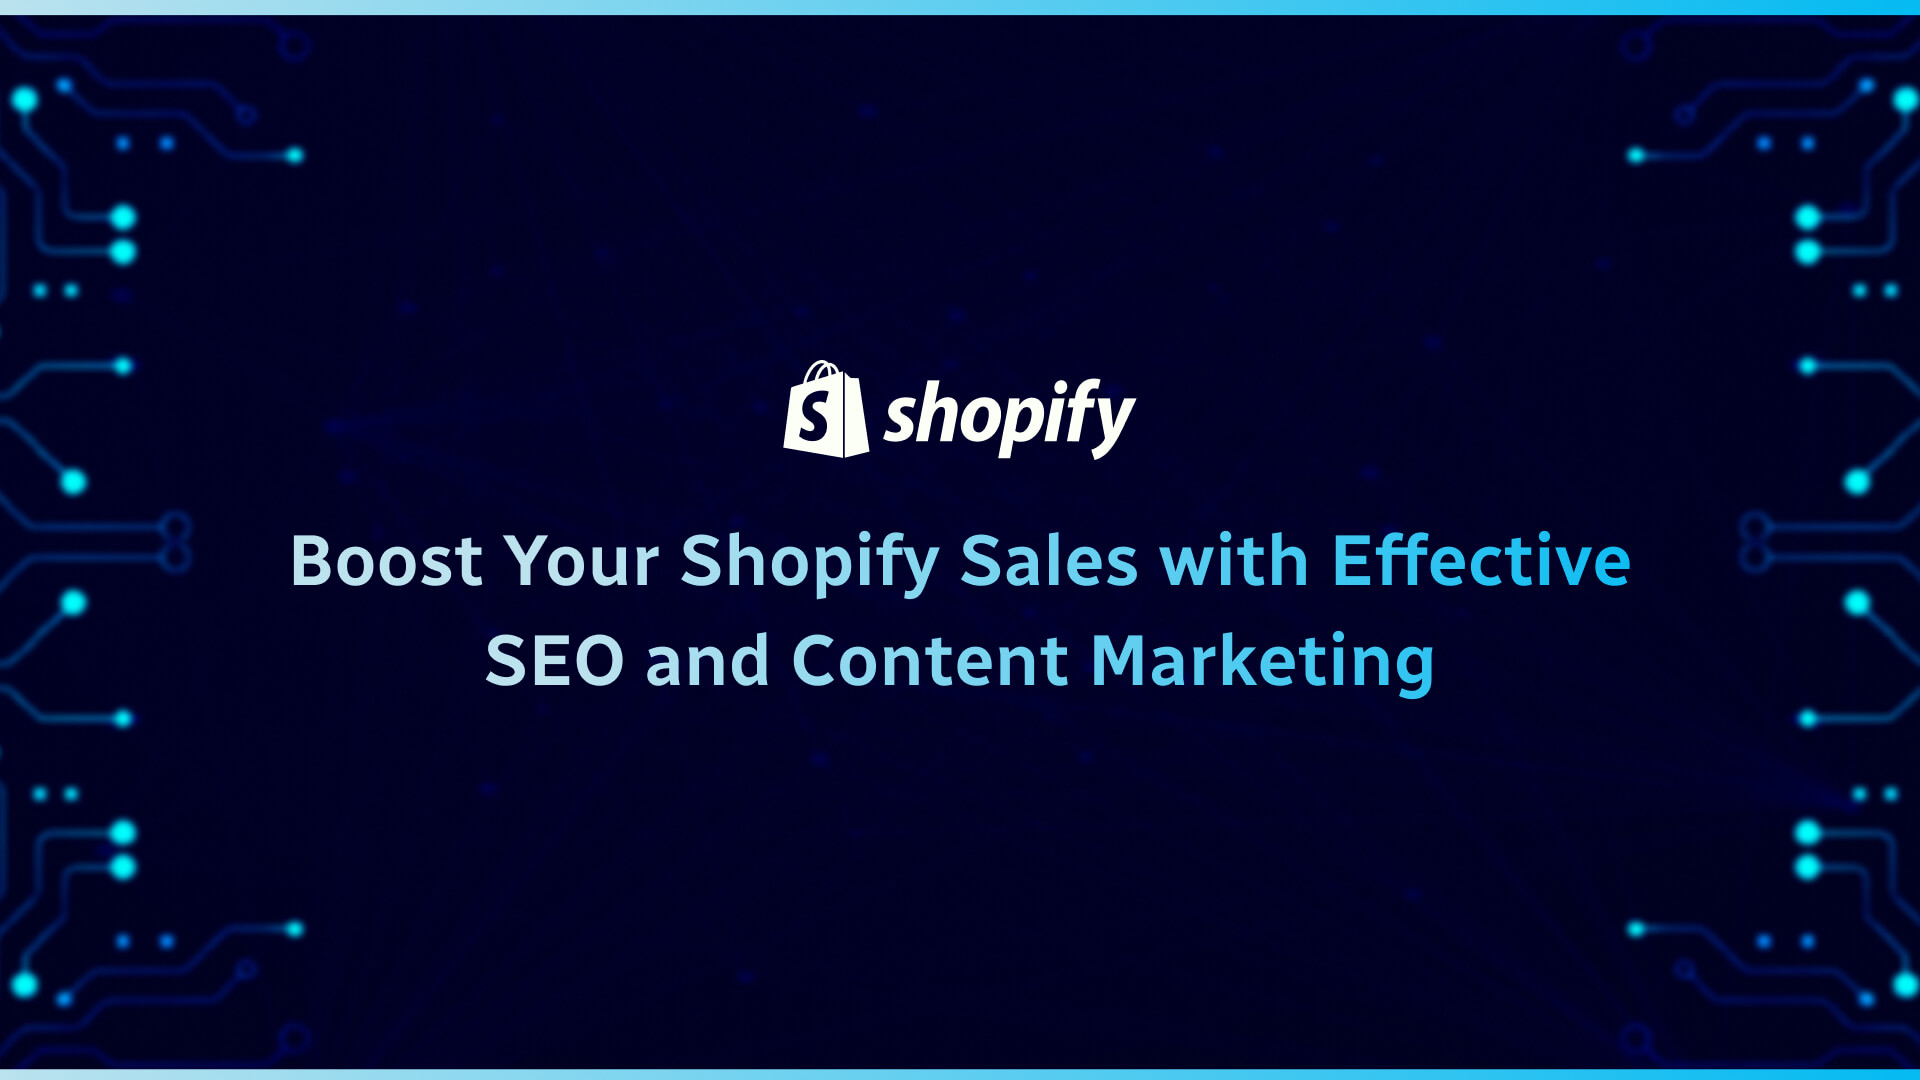 Boost Your Shopify Sales with Effective SEO and Content Marketing